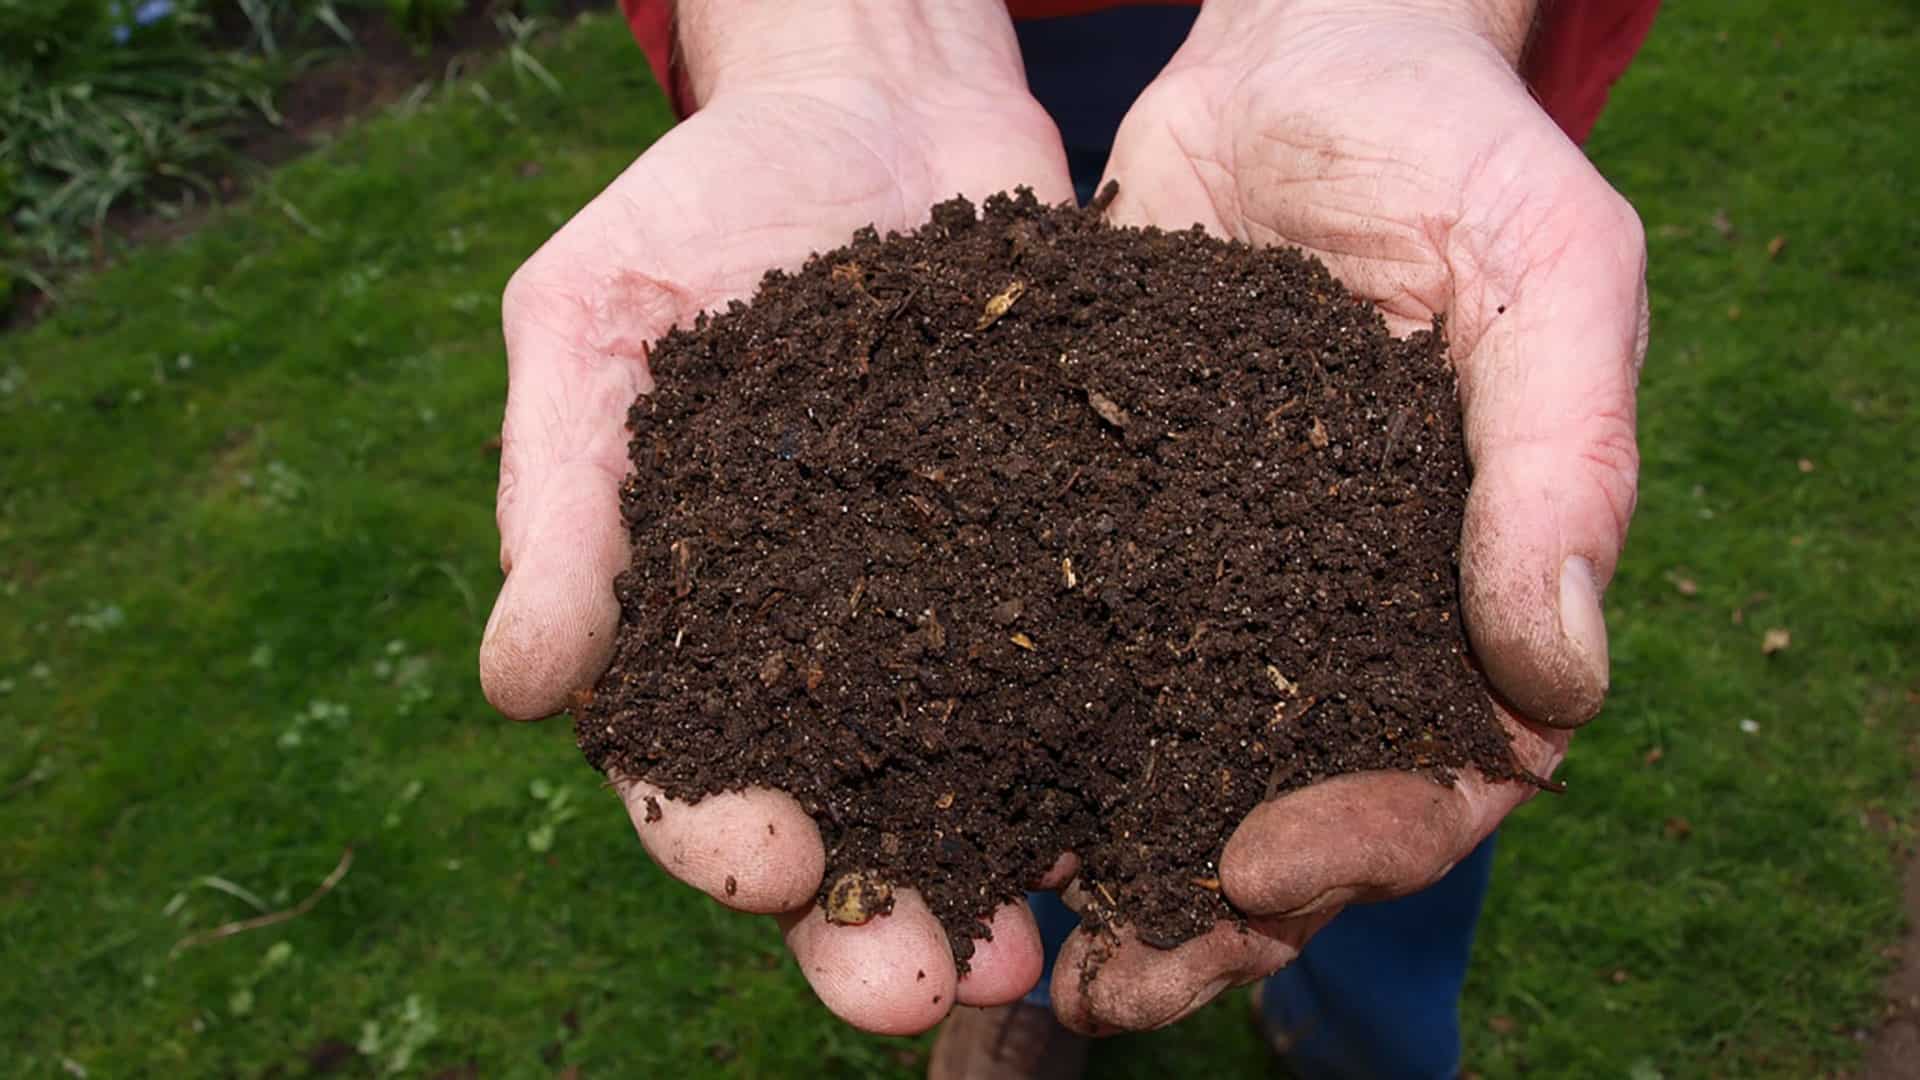 Composting recycles organic waste to produce nutrient rich soil